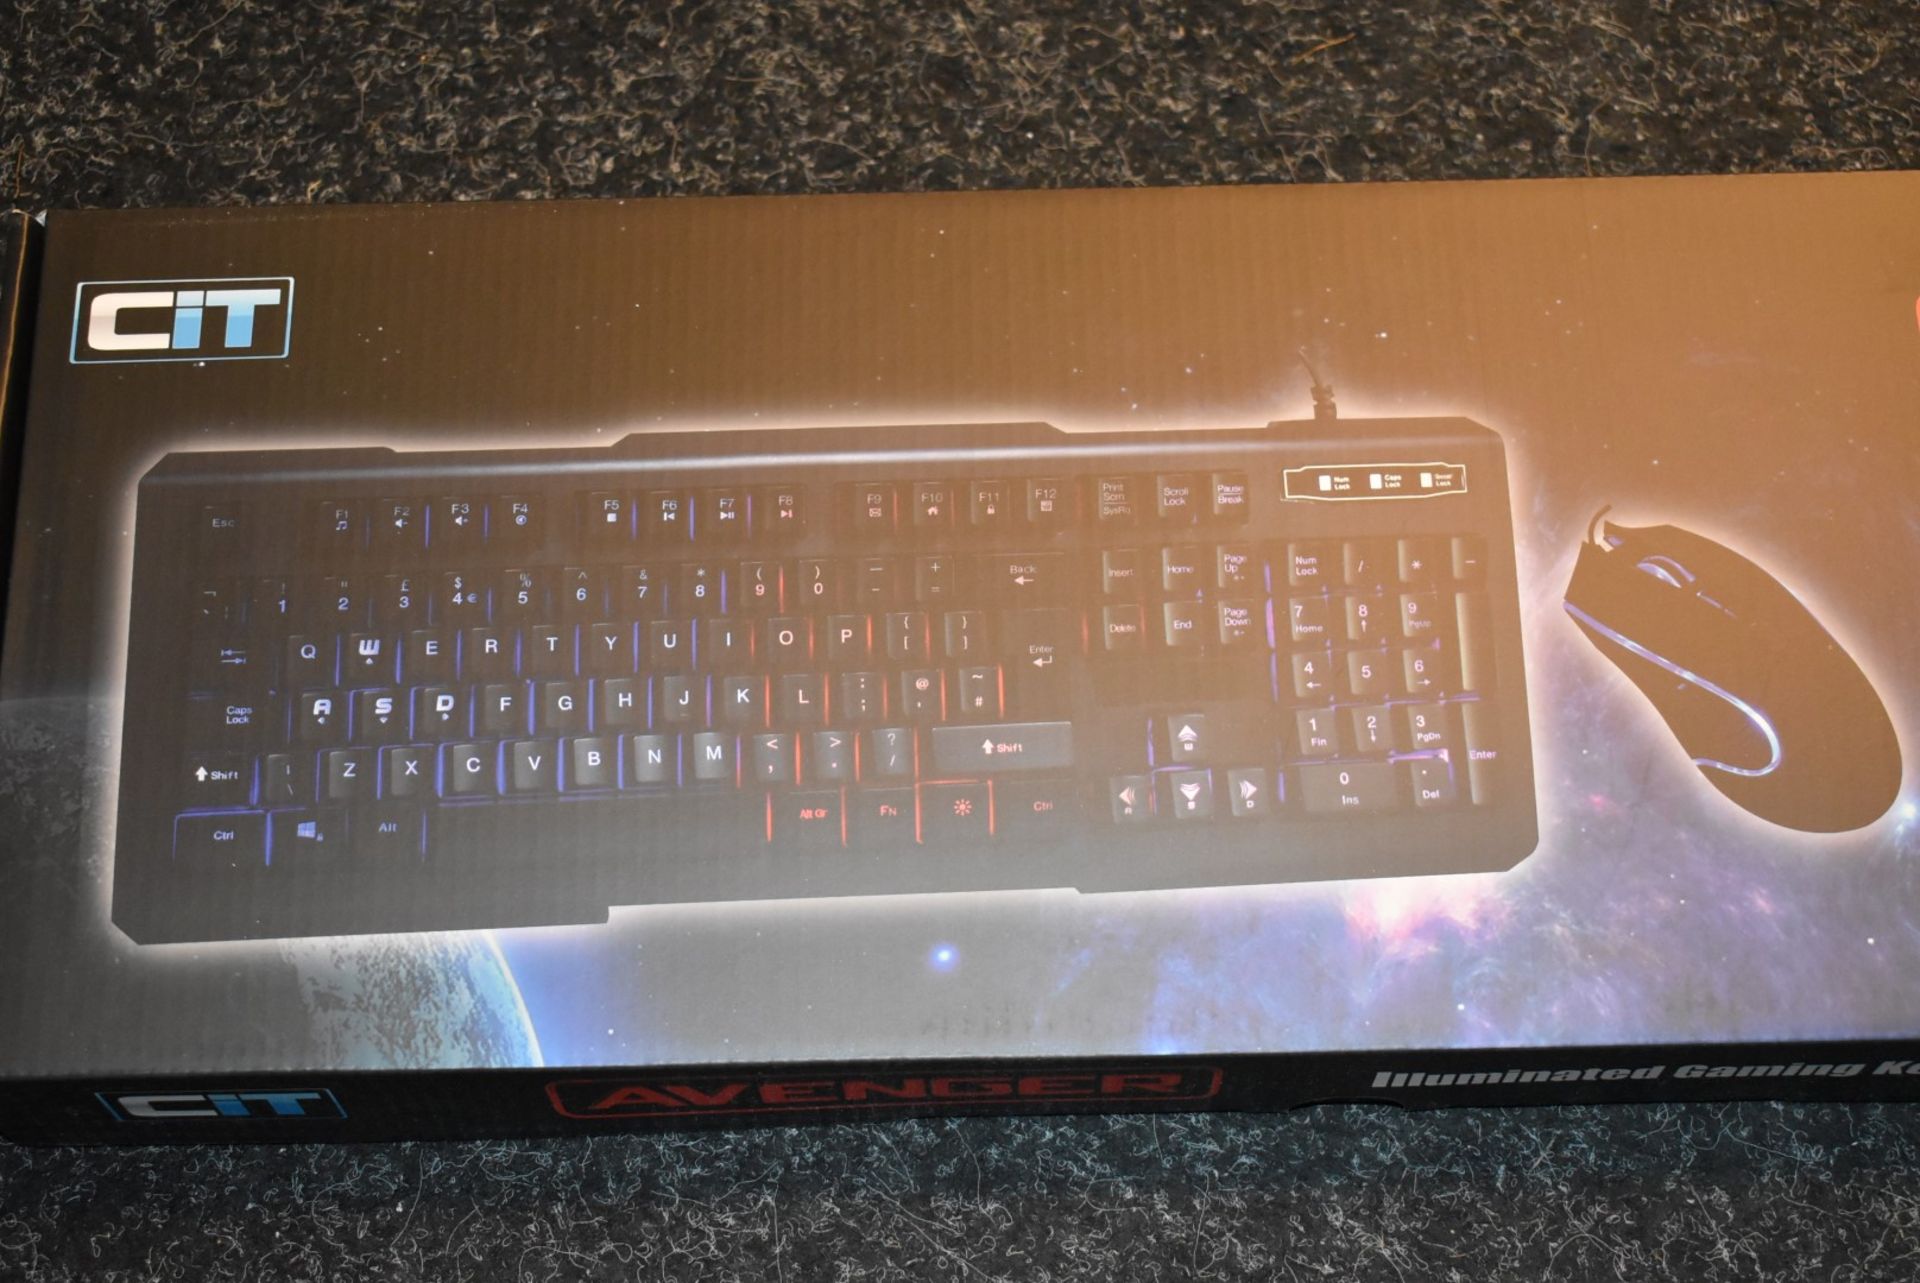 1 x CiT Avenger Gaming Keyboard and Mouse Set - Features 3 Colour Mode LED Backlight, Swappable - Image 2 of 4